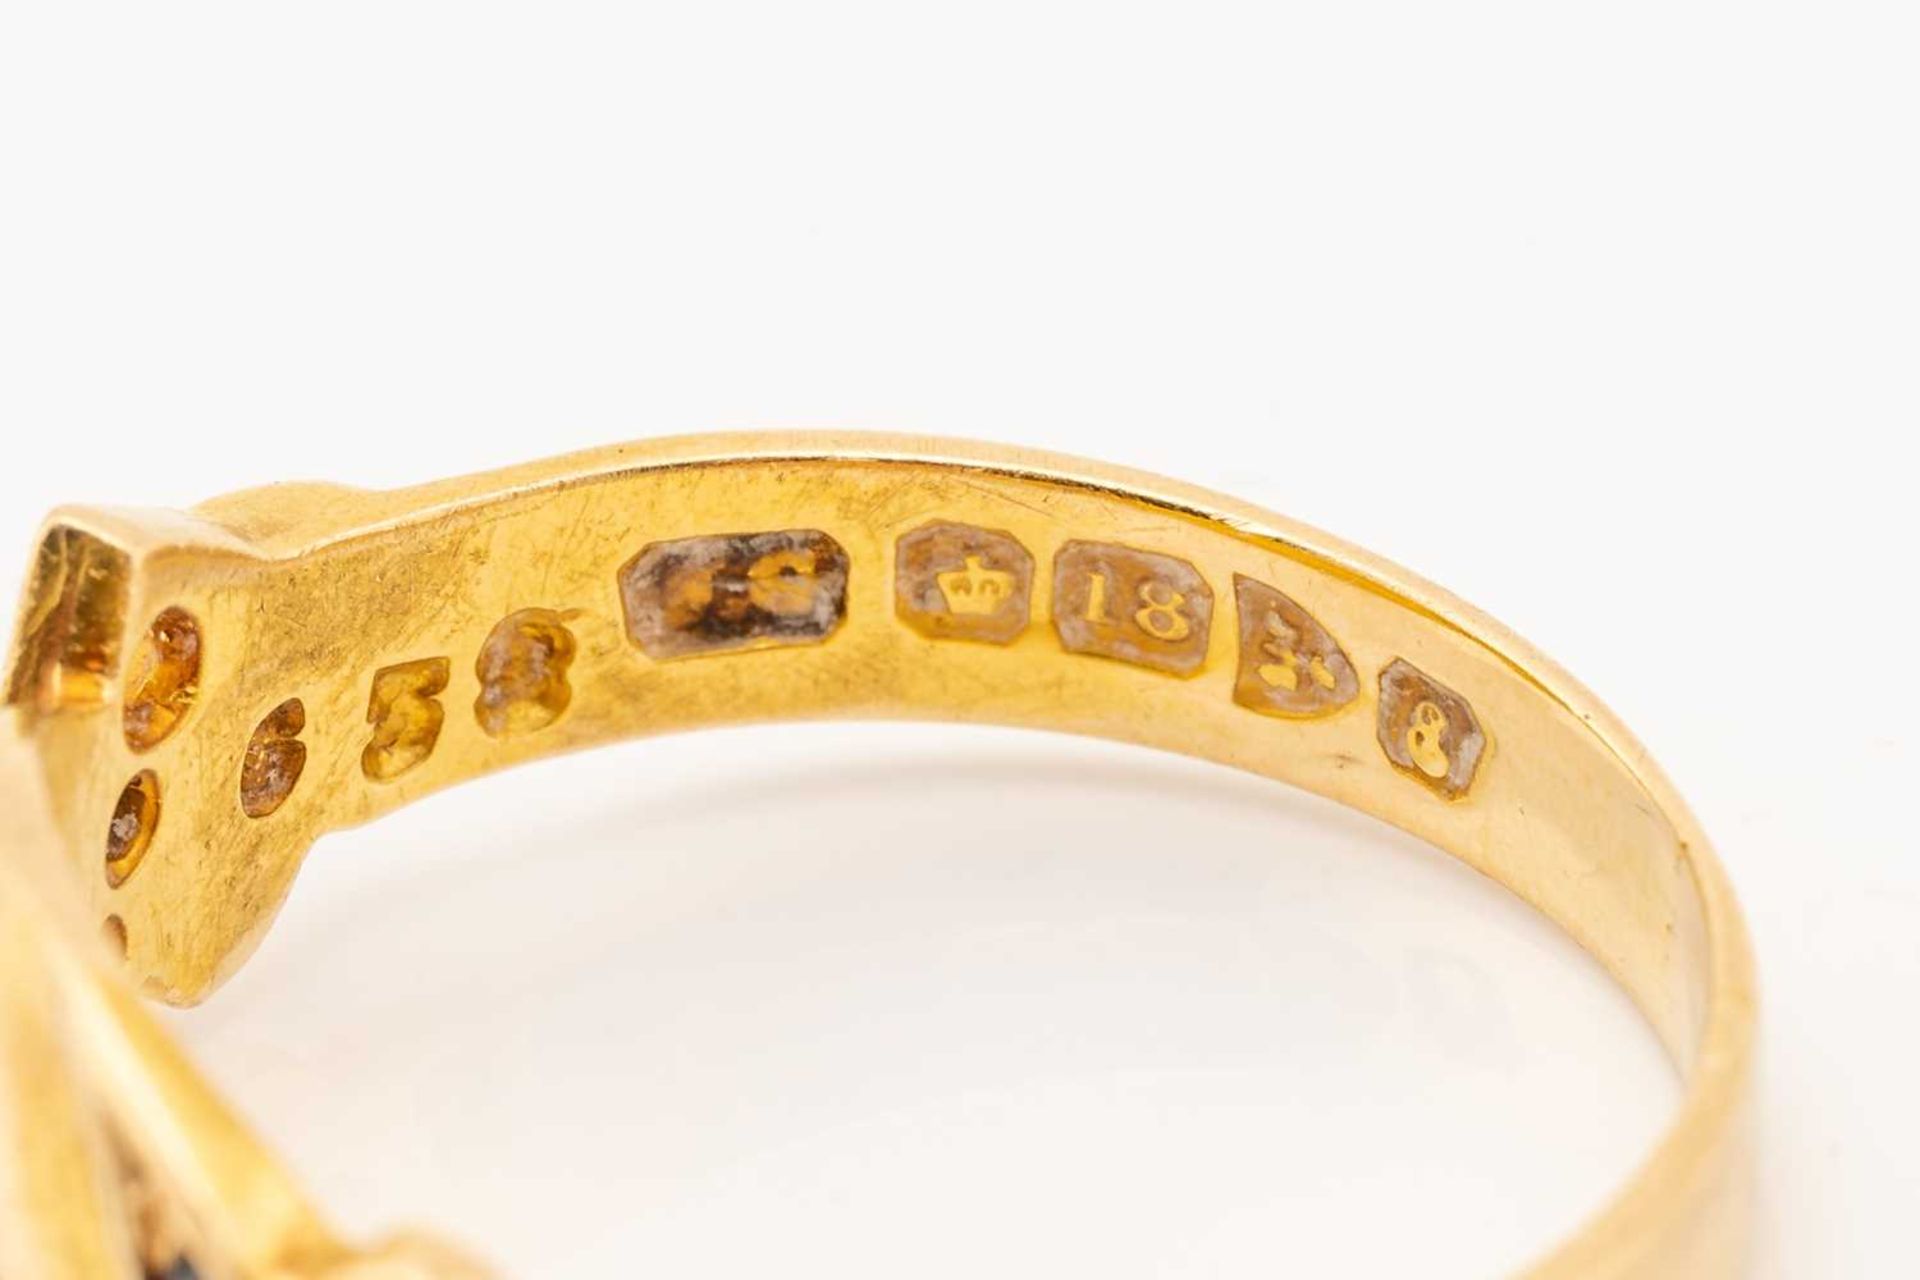 An Edwardian gem-set dress ring in 18ct gold and a diamond-set signet ring; the first ring comprises - Image 5 of 6